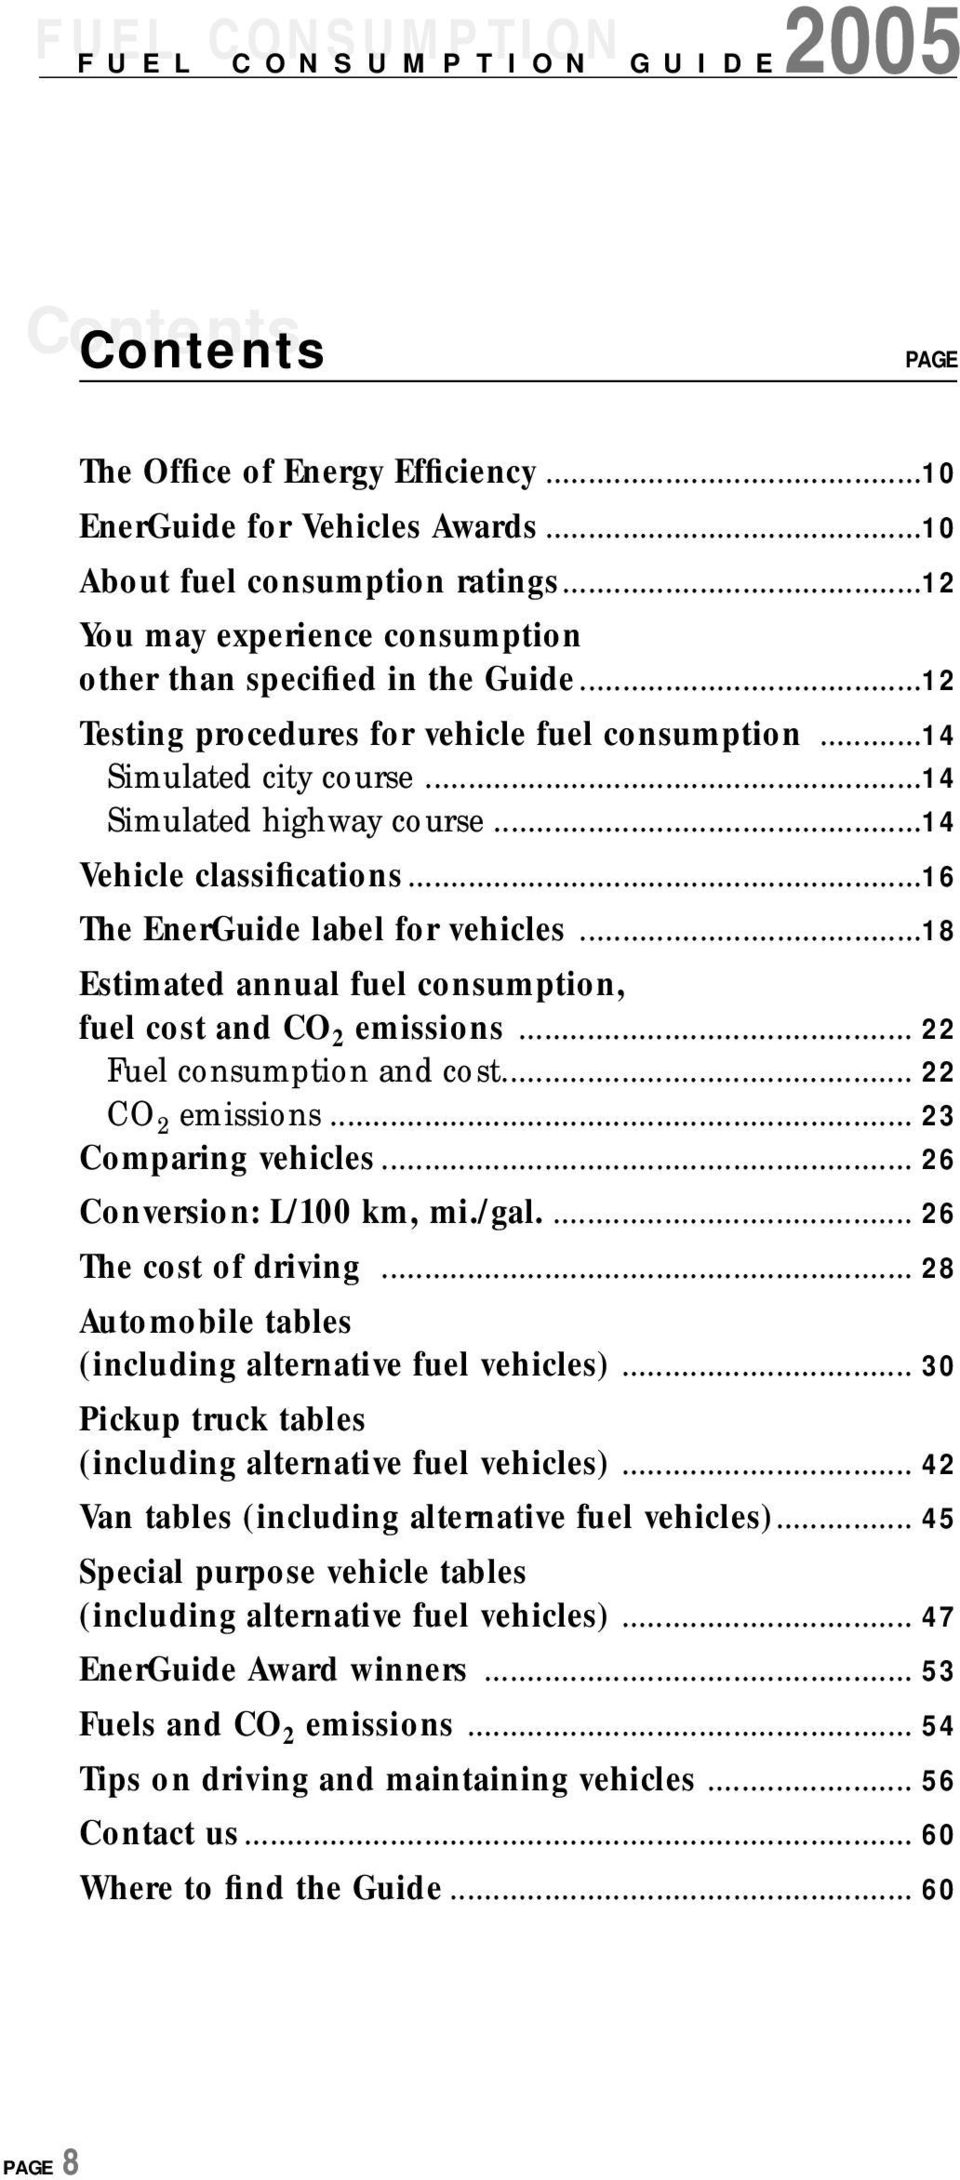 ..14 Vehicle classifications...16 The EnerGuide label for vehicles...18 Estimated annual fuel consumption, fuel cost and CO 2 emissions... 22 Fuel consumption and cost... 22 CO 2 emissions.